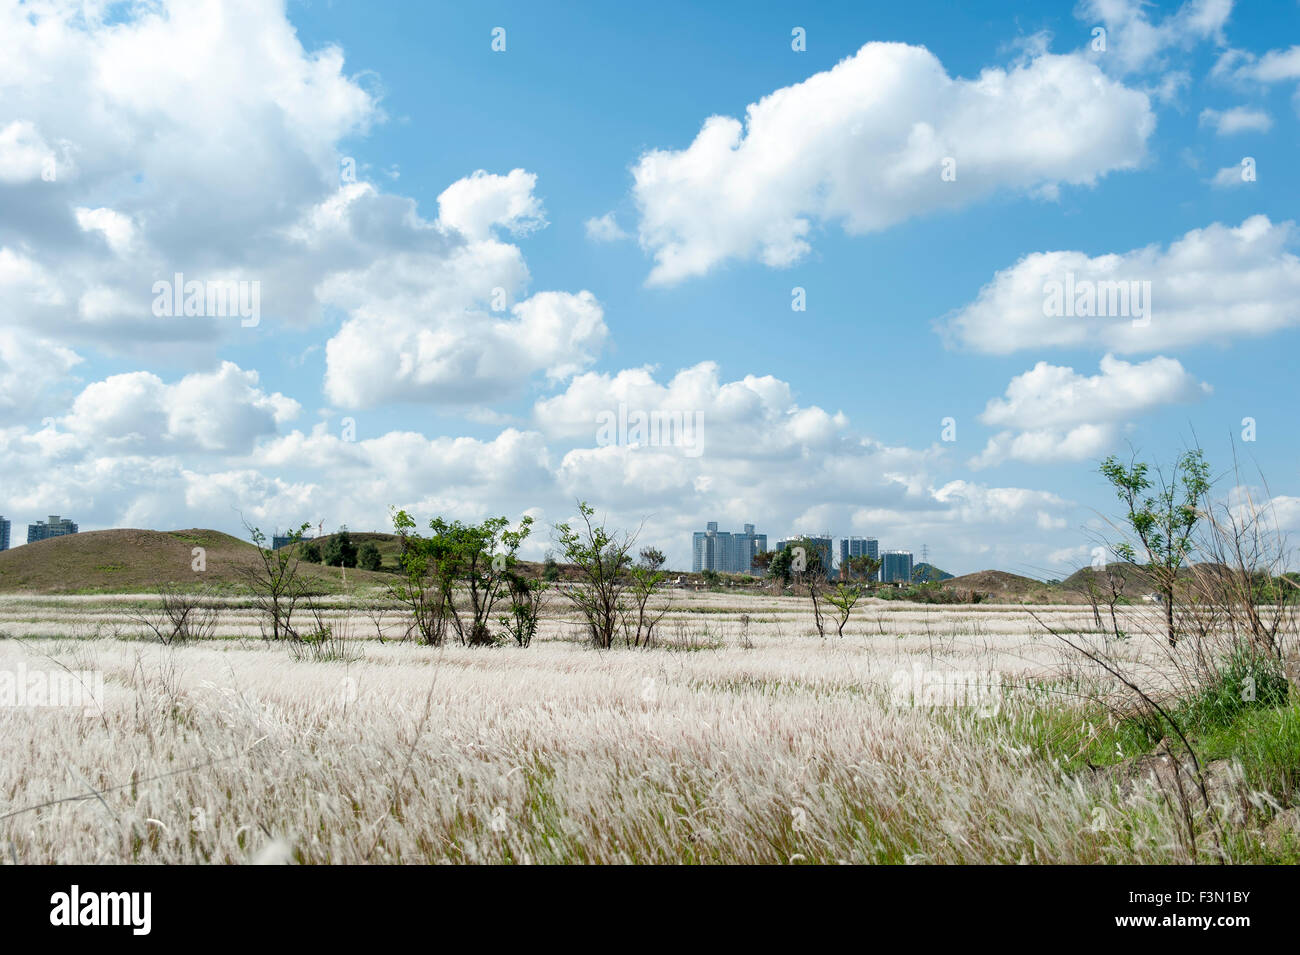 Field of Miscanthus with nice weather Stock Photo